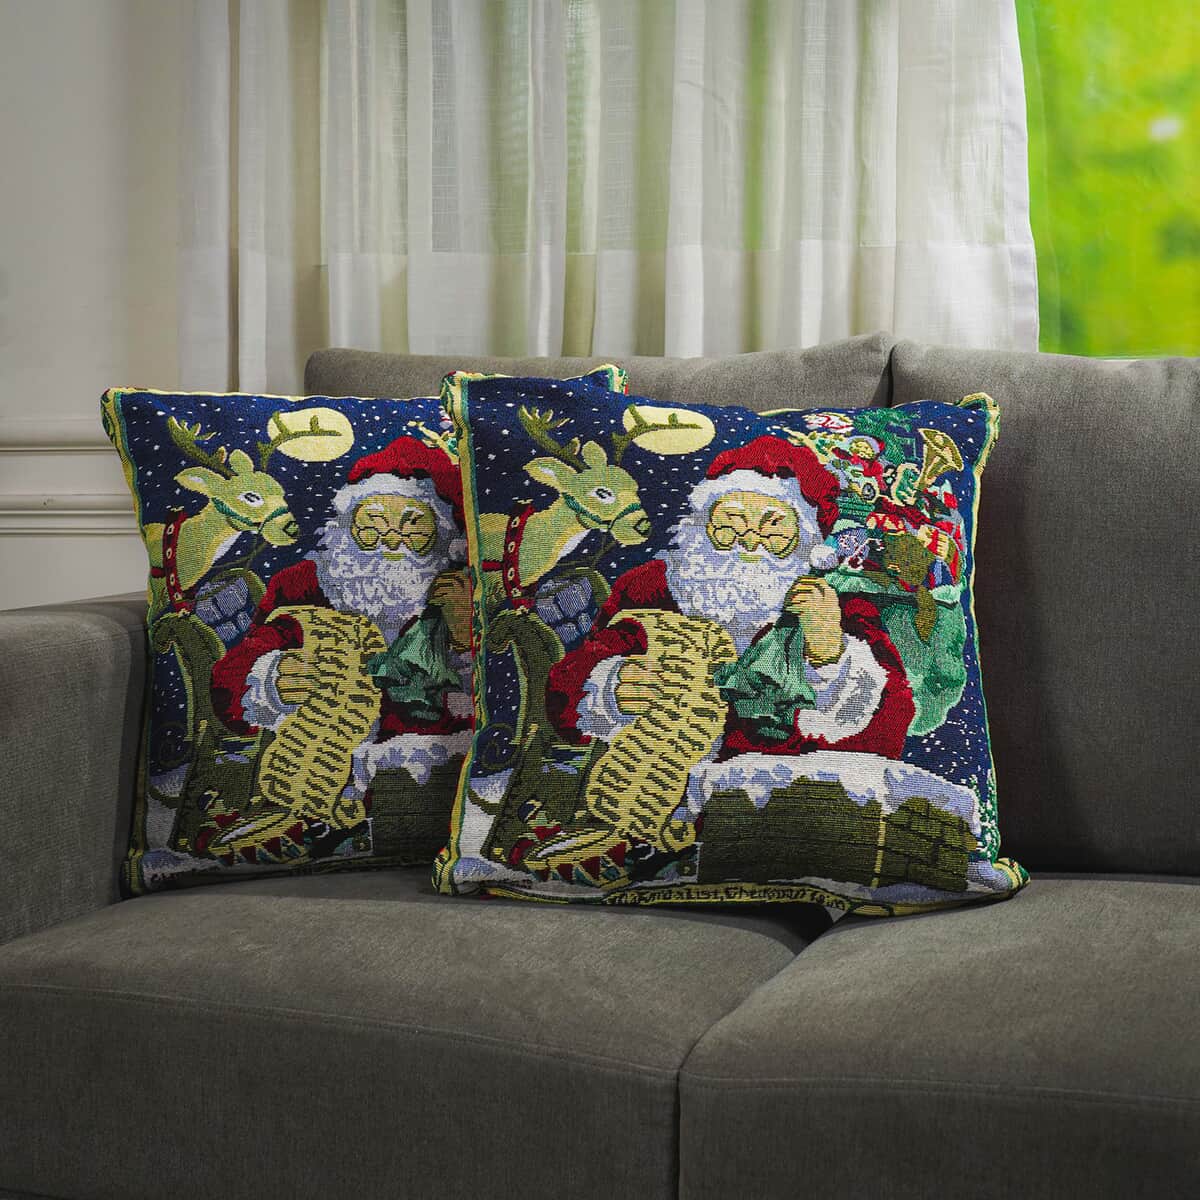 Set of 2 Multi Color Santa Jacquard Woven Cushion Covers, Pillow Protectors, Pillow Cover, Pillow Shams, Pillow Case Covers image number 1